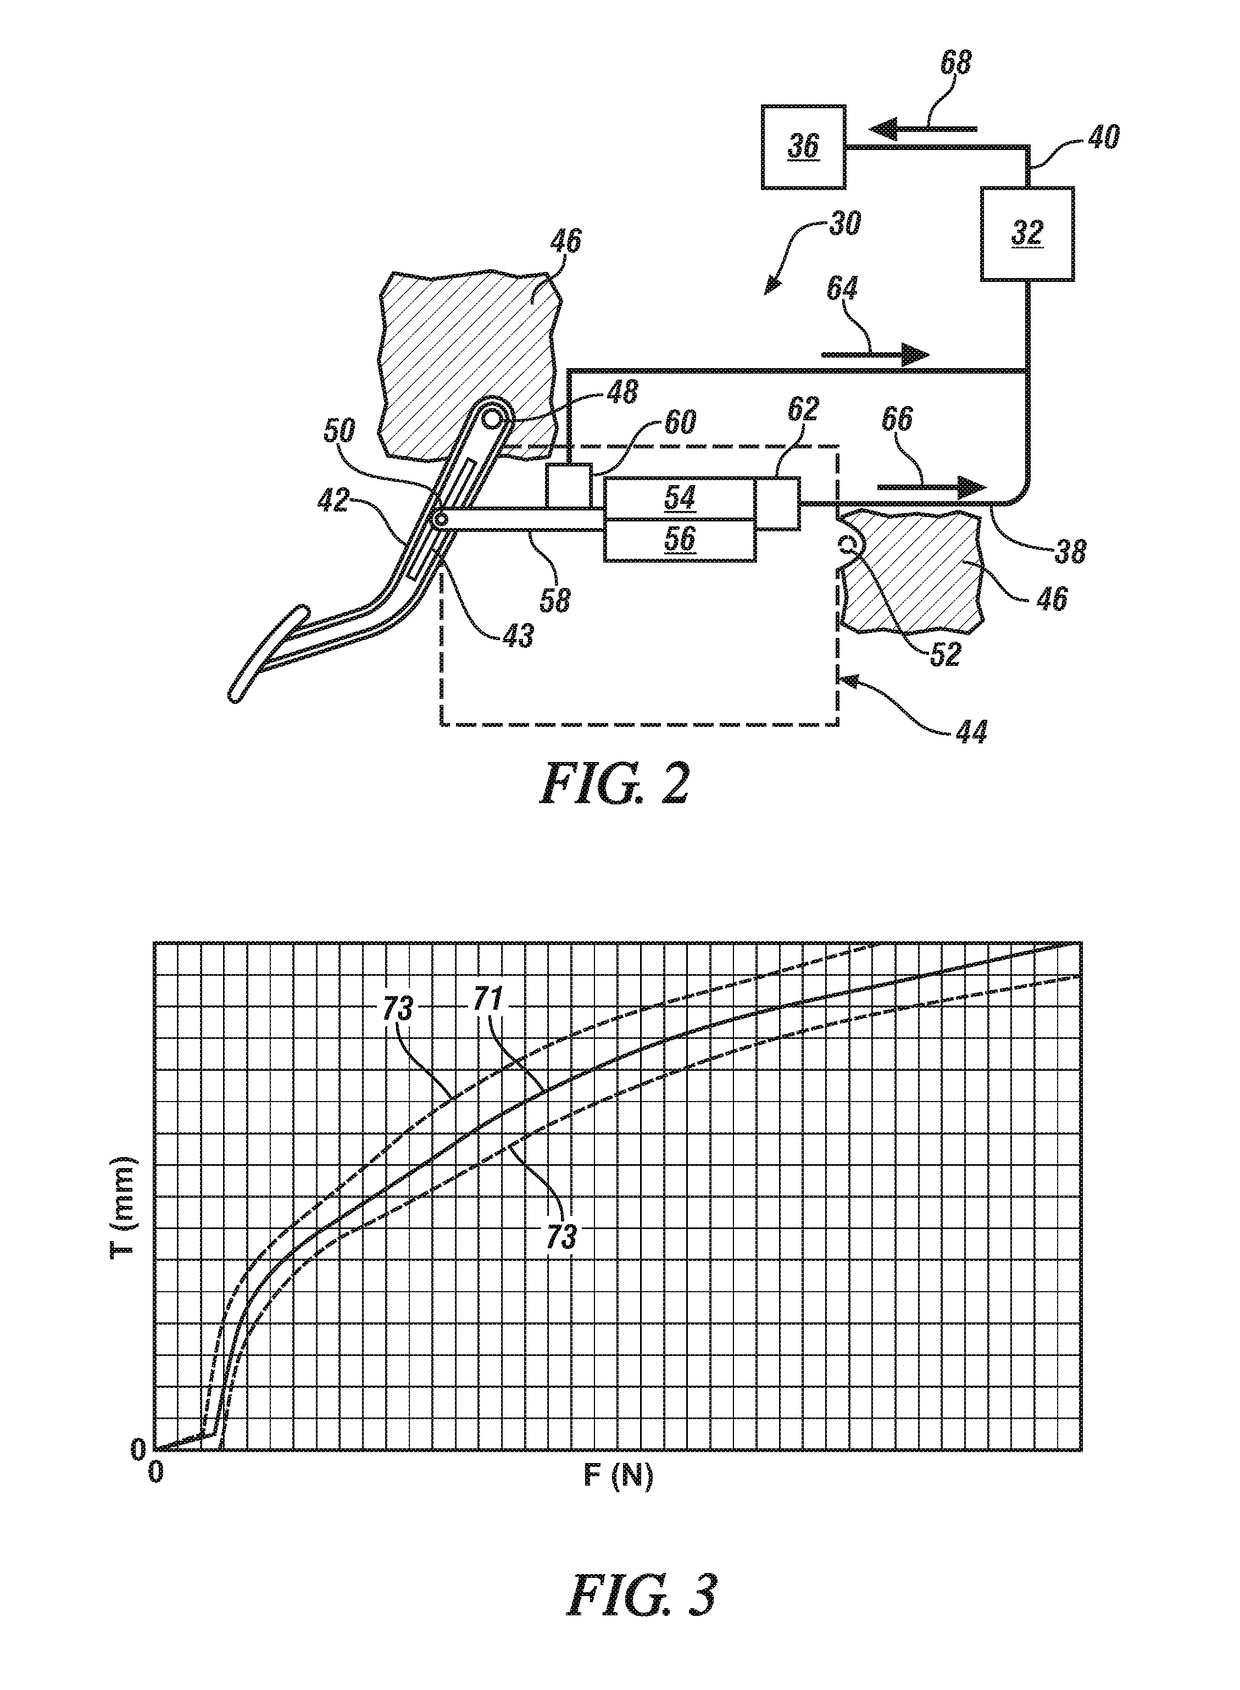 Braking system for a vehicle with an adjustable brake pedal assembly